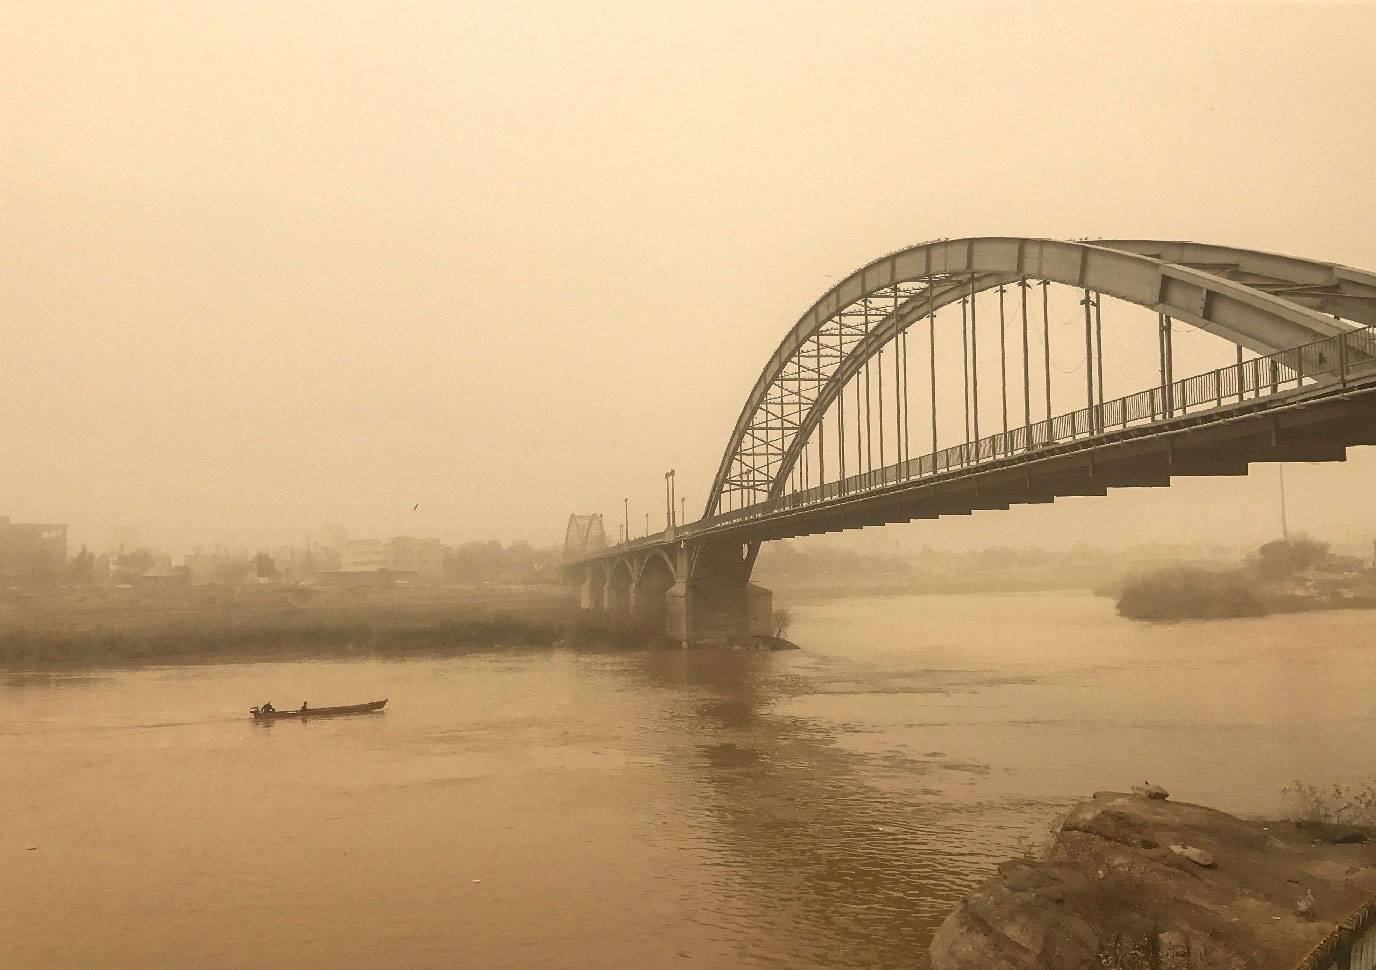 A general view of a bridge in the Iranian city of Ahvaz (also known as Ahwaz to its Arab inhabitants) during a sandstorm.